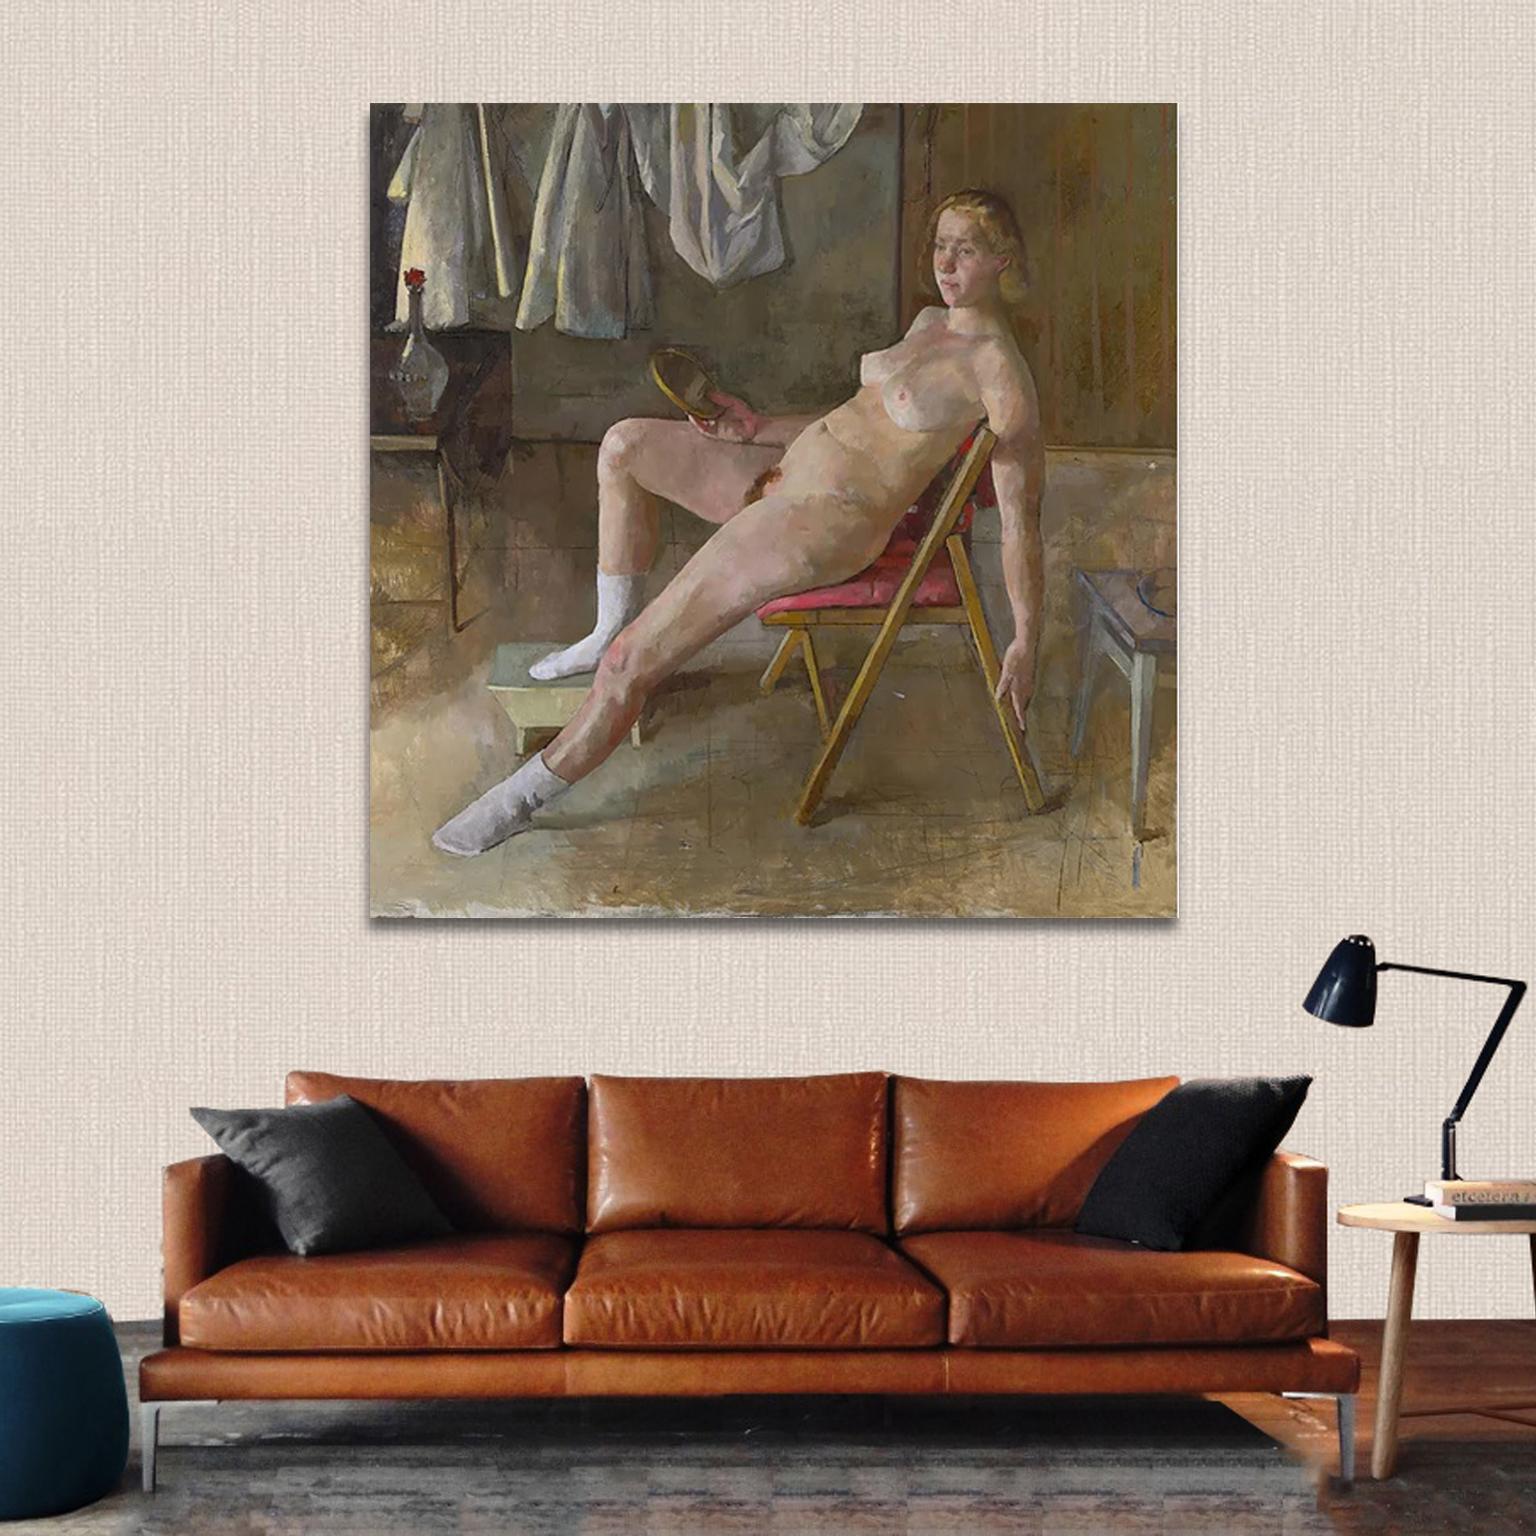 ‘Seated Woman’ Figurative Nude Female Model Large Oil On Canvas By Roni Taharlev 1